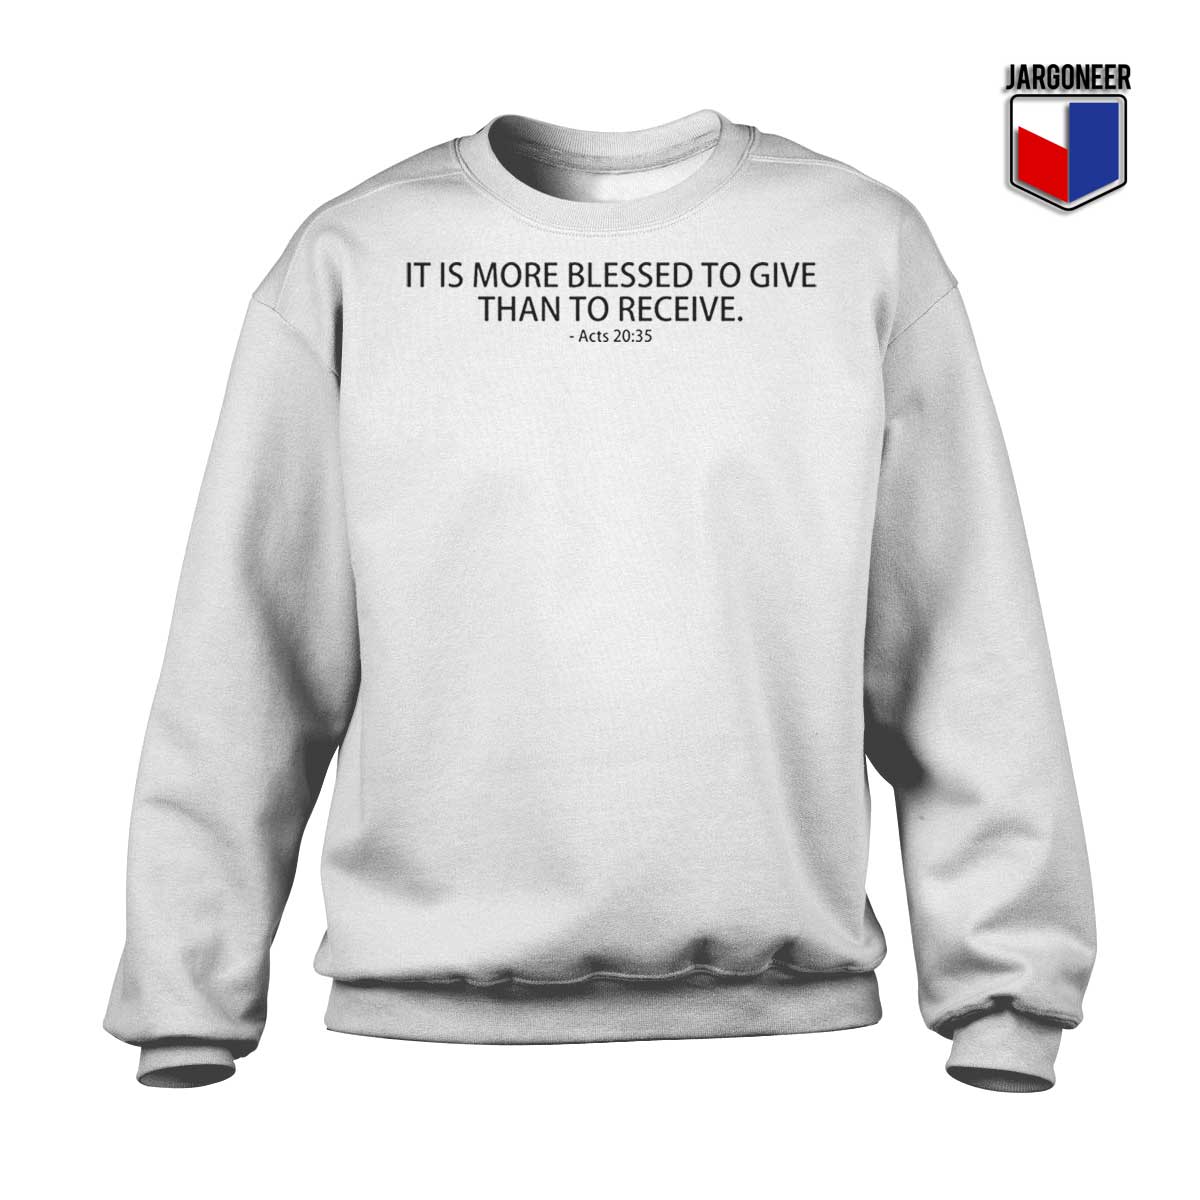 More Blessed To Give Than To Receive White Sweatshirt - Shop Unique Graphic Cool Shirt Designs